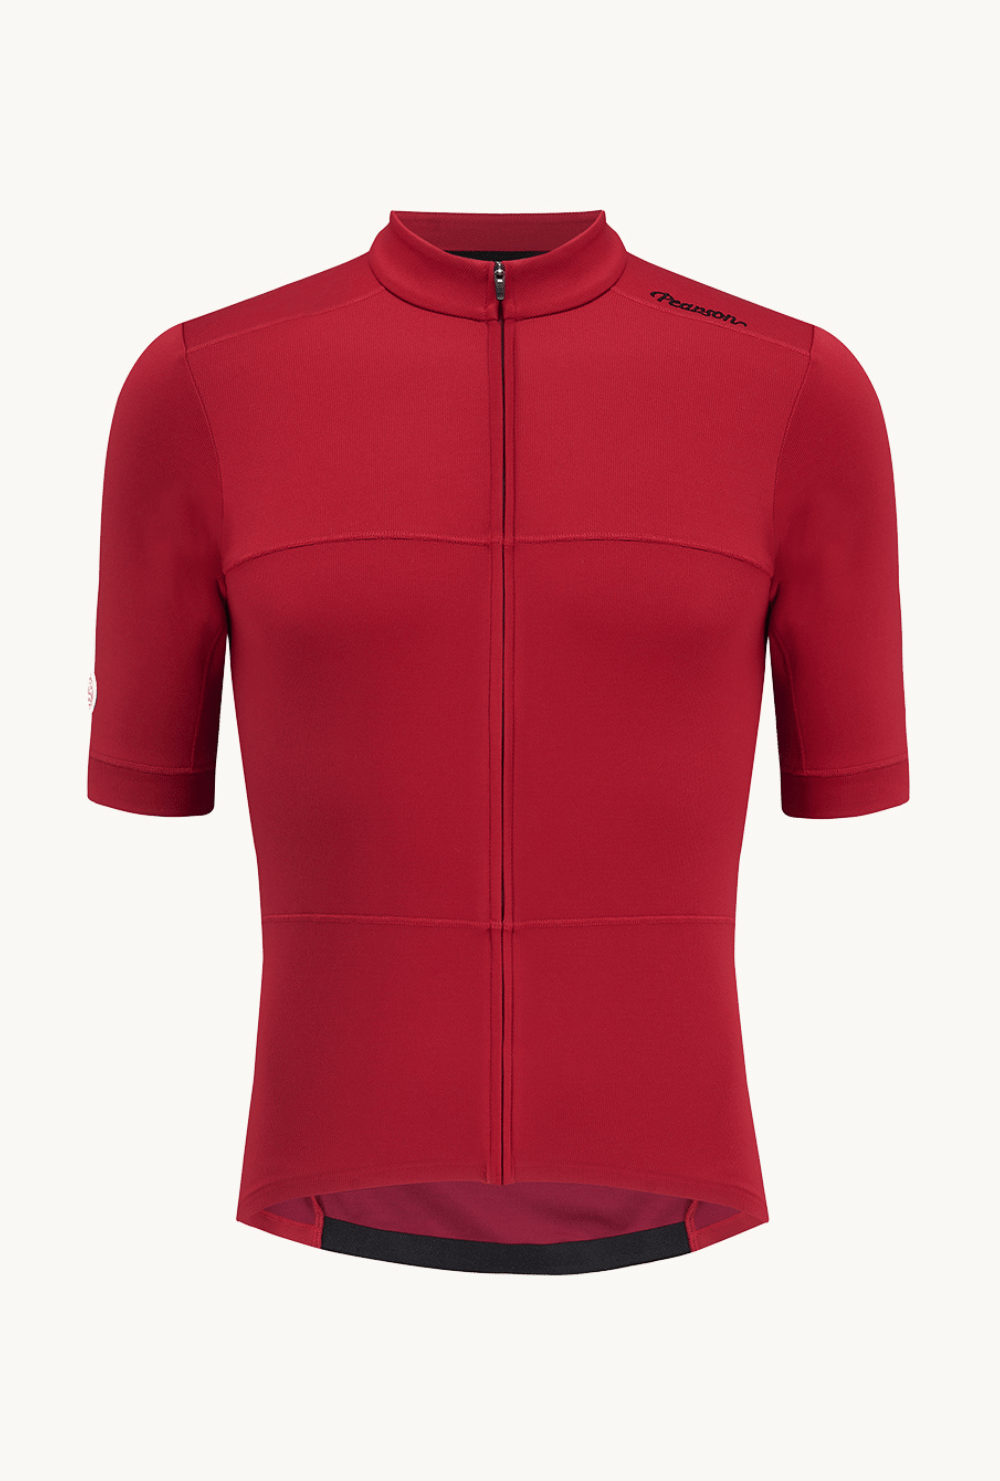 Pearson 1860  To Brighton - Road Short Sleeve Merino Sportwool Jersey  Xx-large / Red